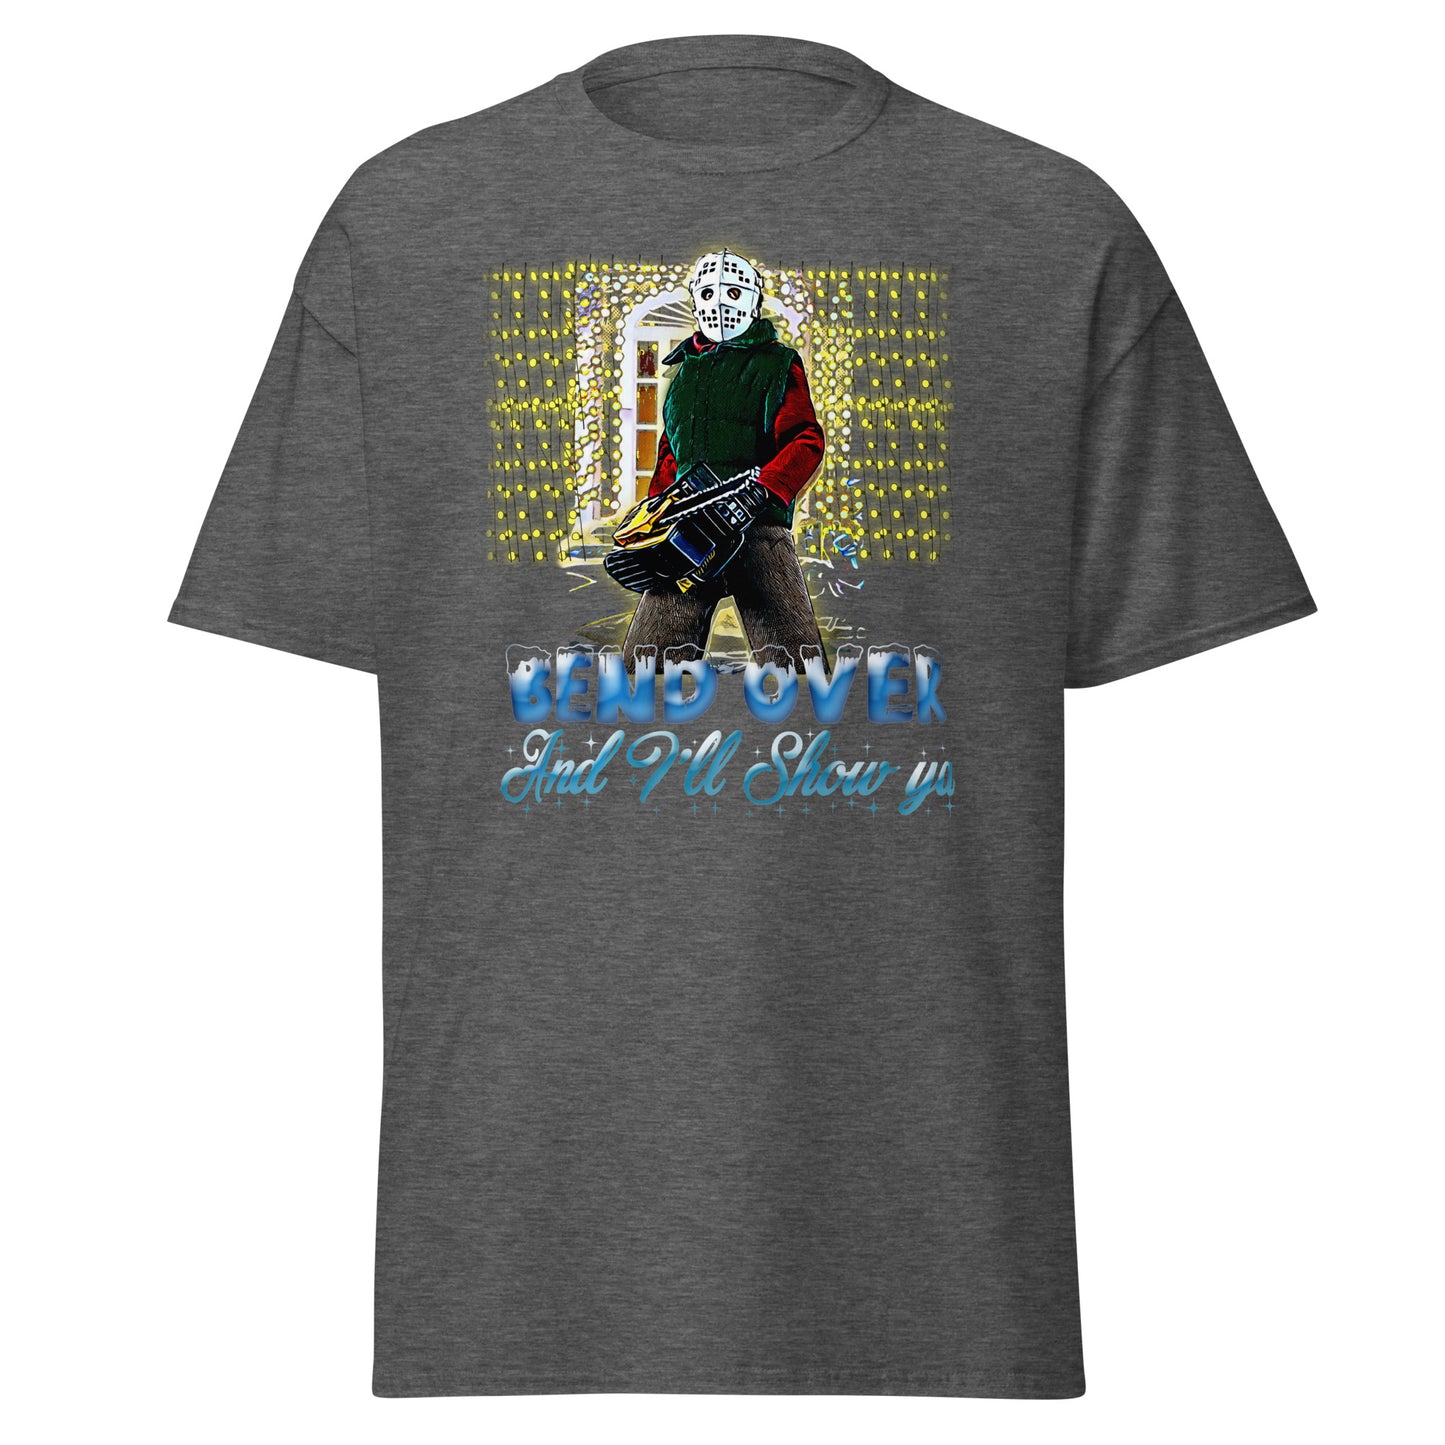 Christmas Vacation T-Shirts - Clark Griswold Quote Shirts - Grey